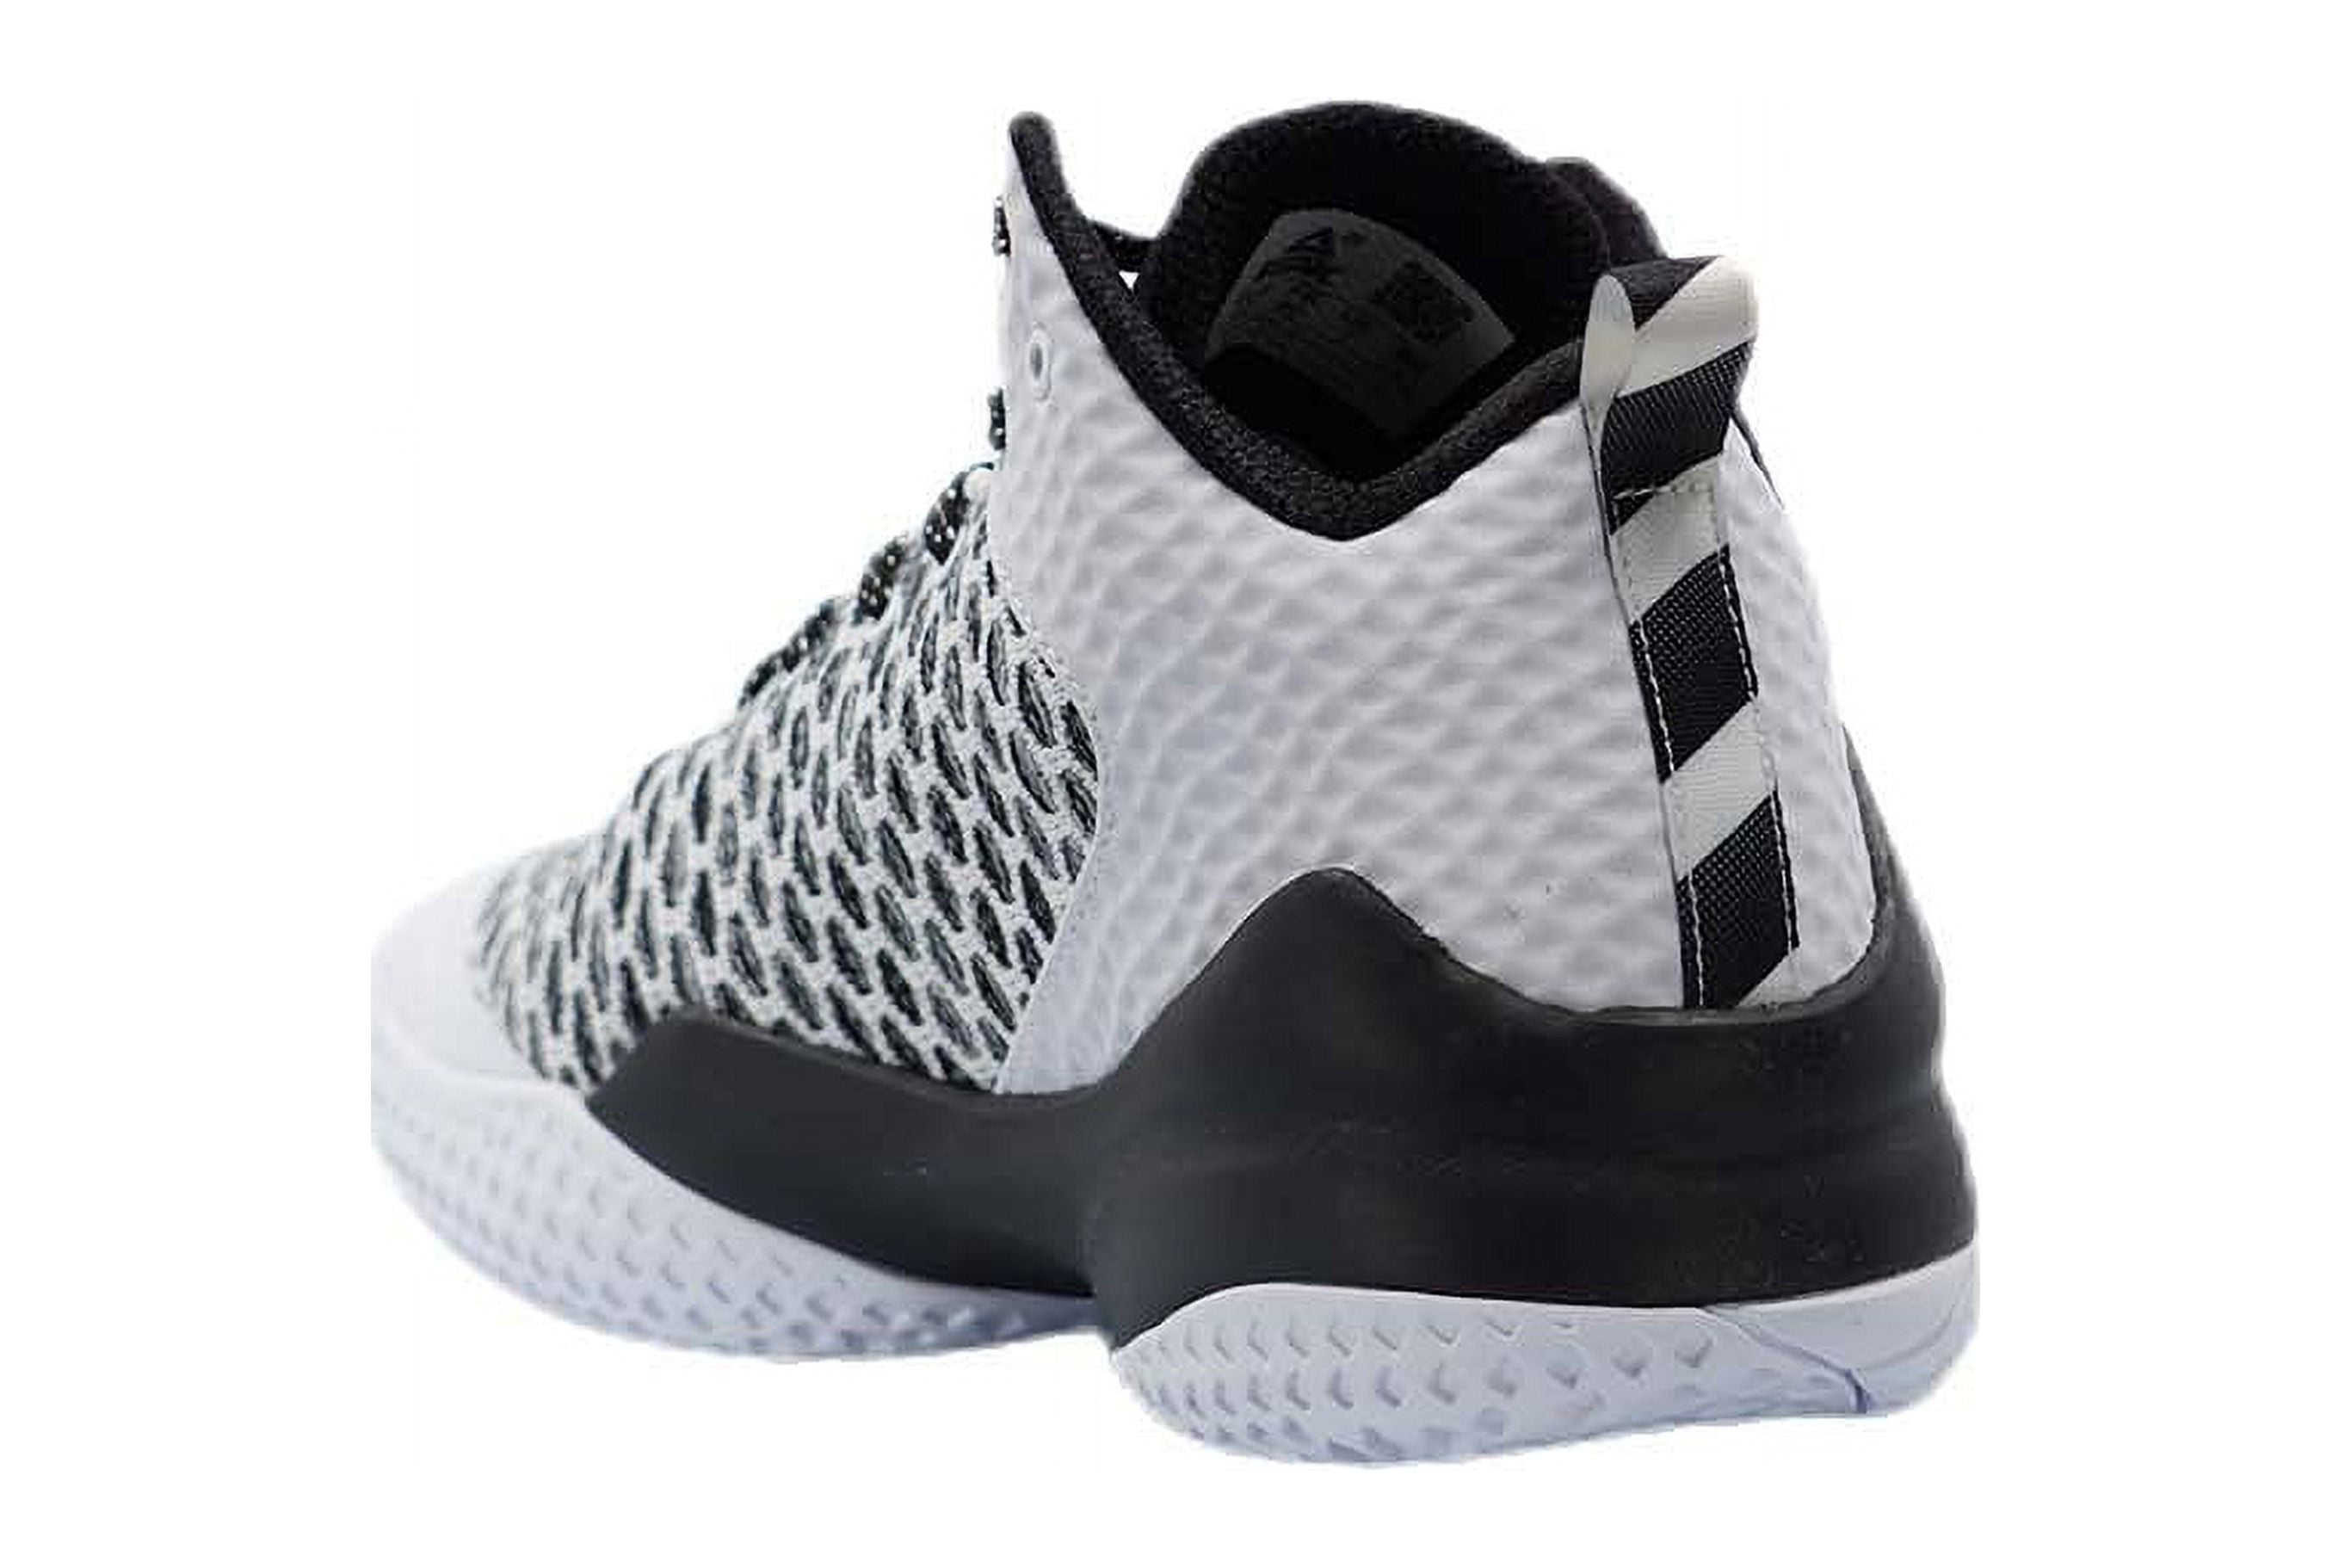 Peak All-round High Actual Basketball Shoes - White